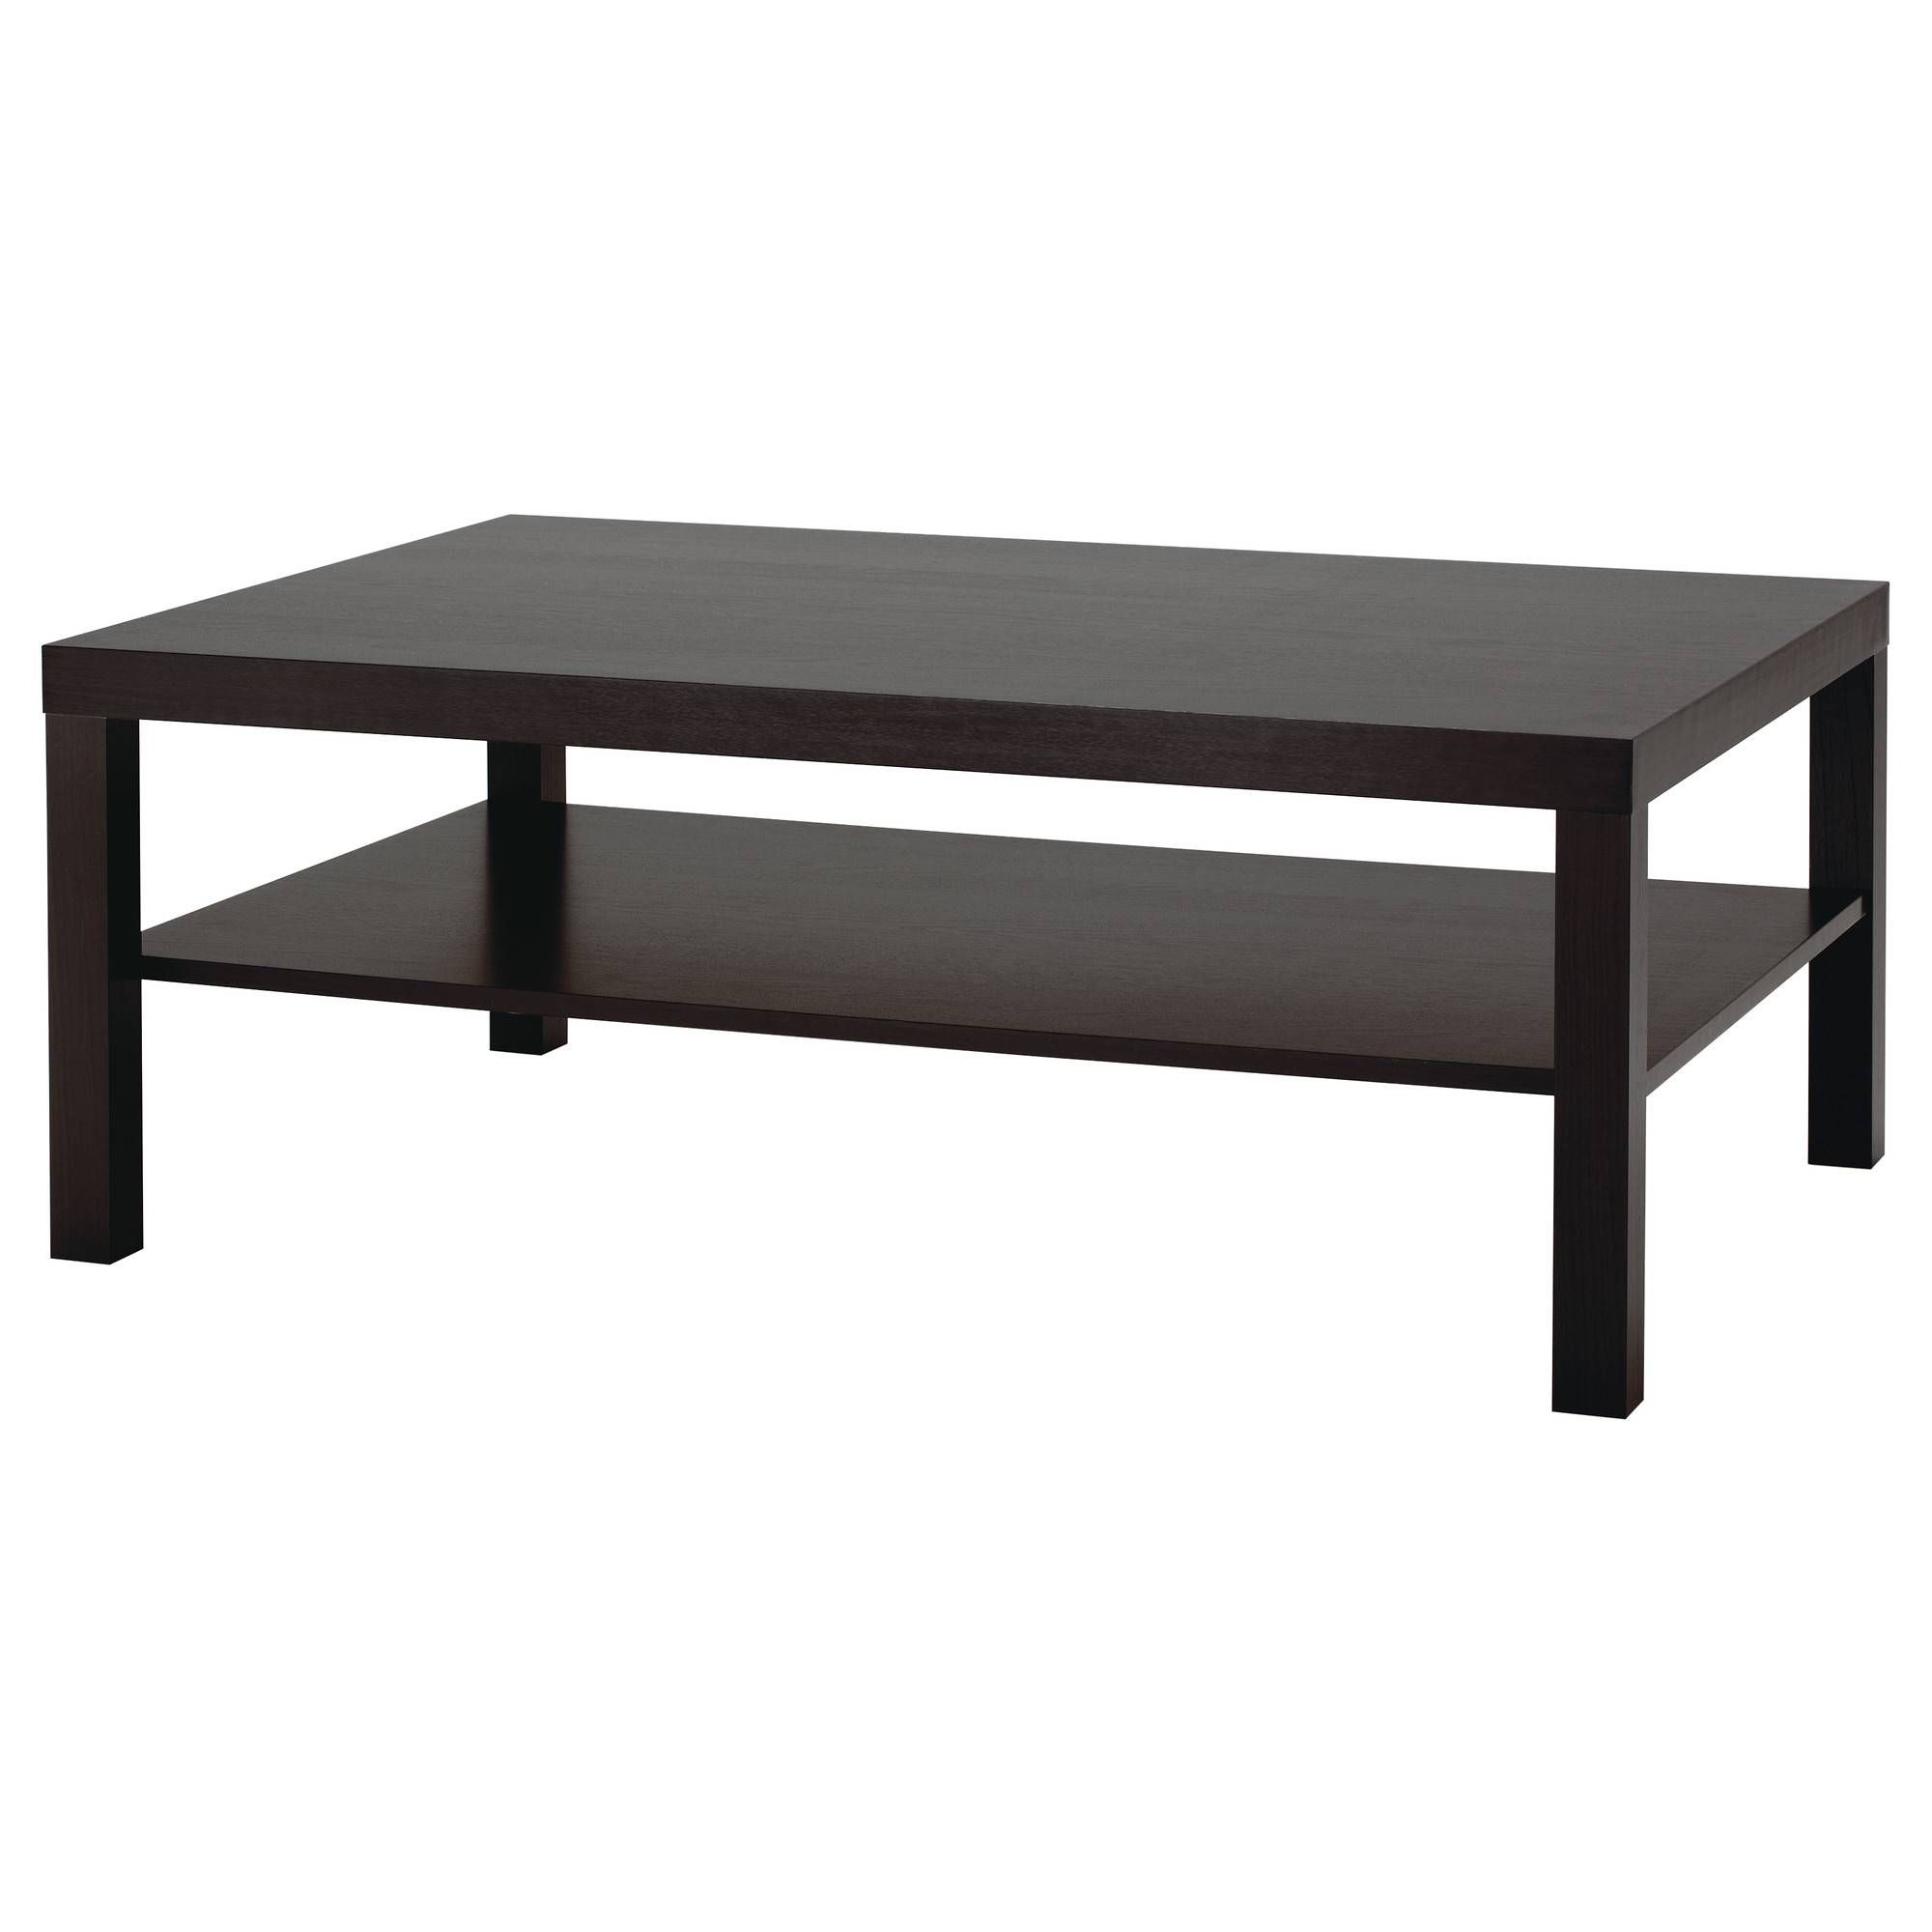 Furniture: Inexpensive Coffee Tables | End Tables At Big Lots Intended For Big Black Coffee Tables (View 5 of 30)